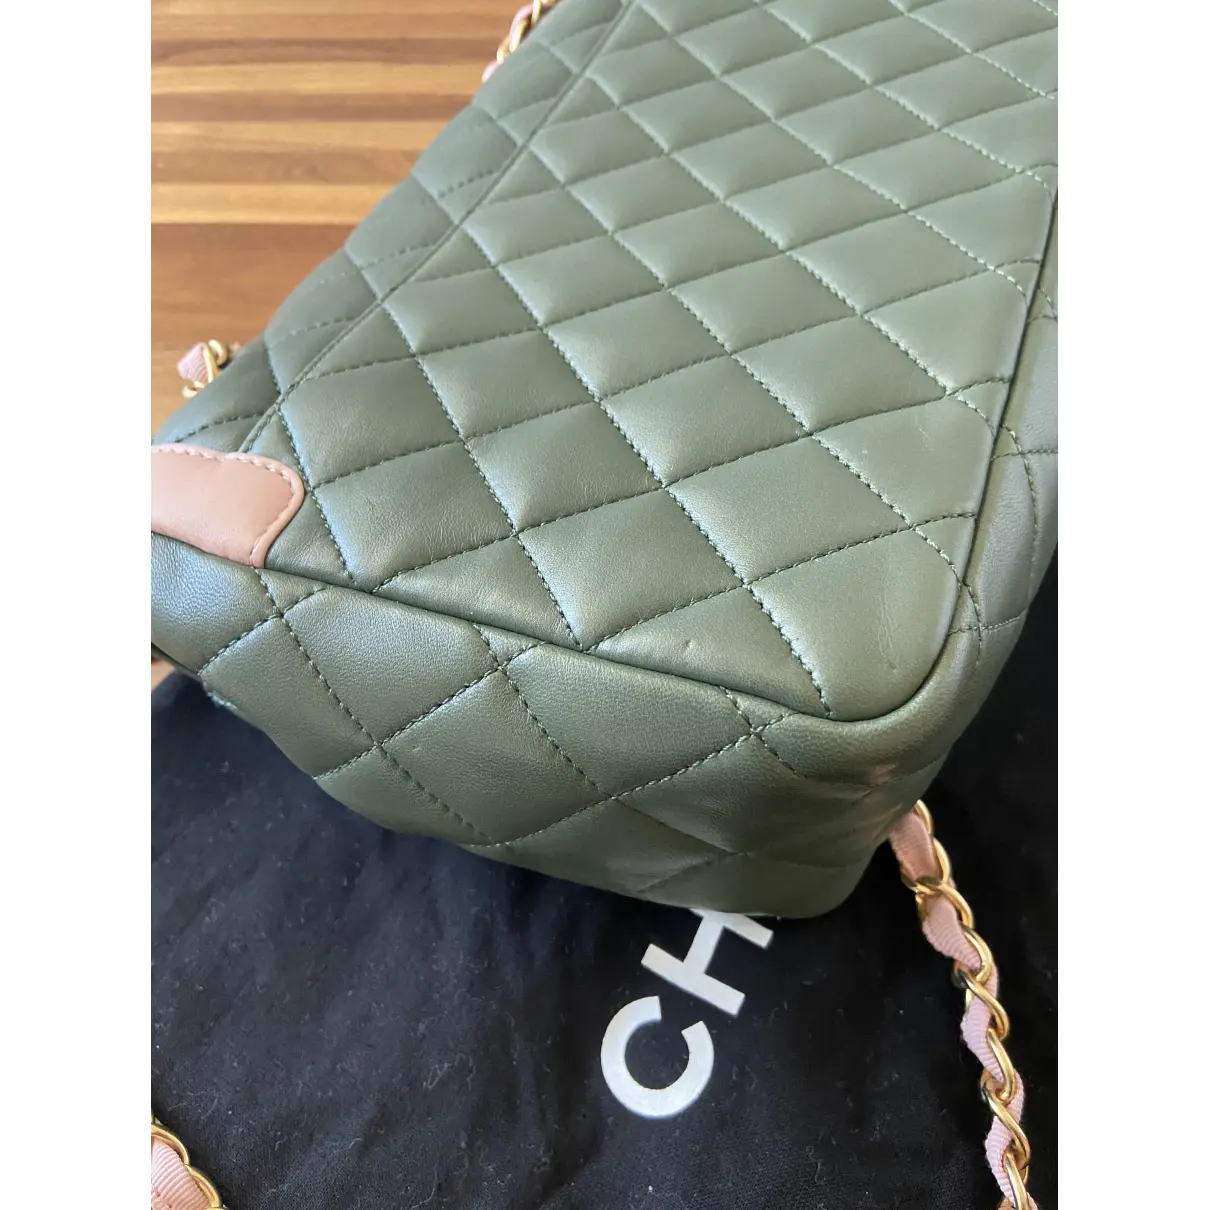 Diana leather bag Chanel